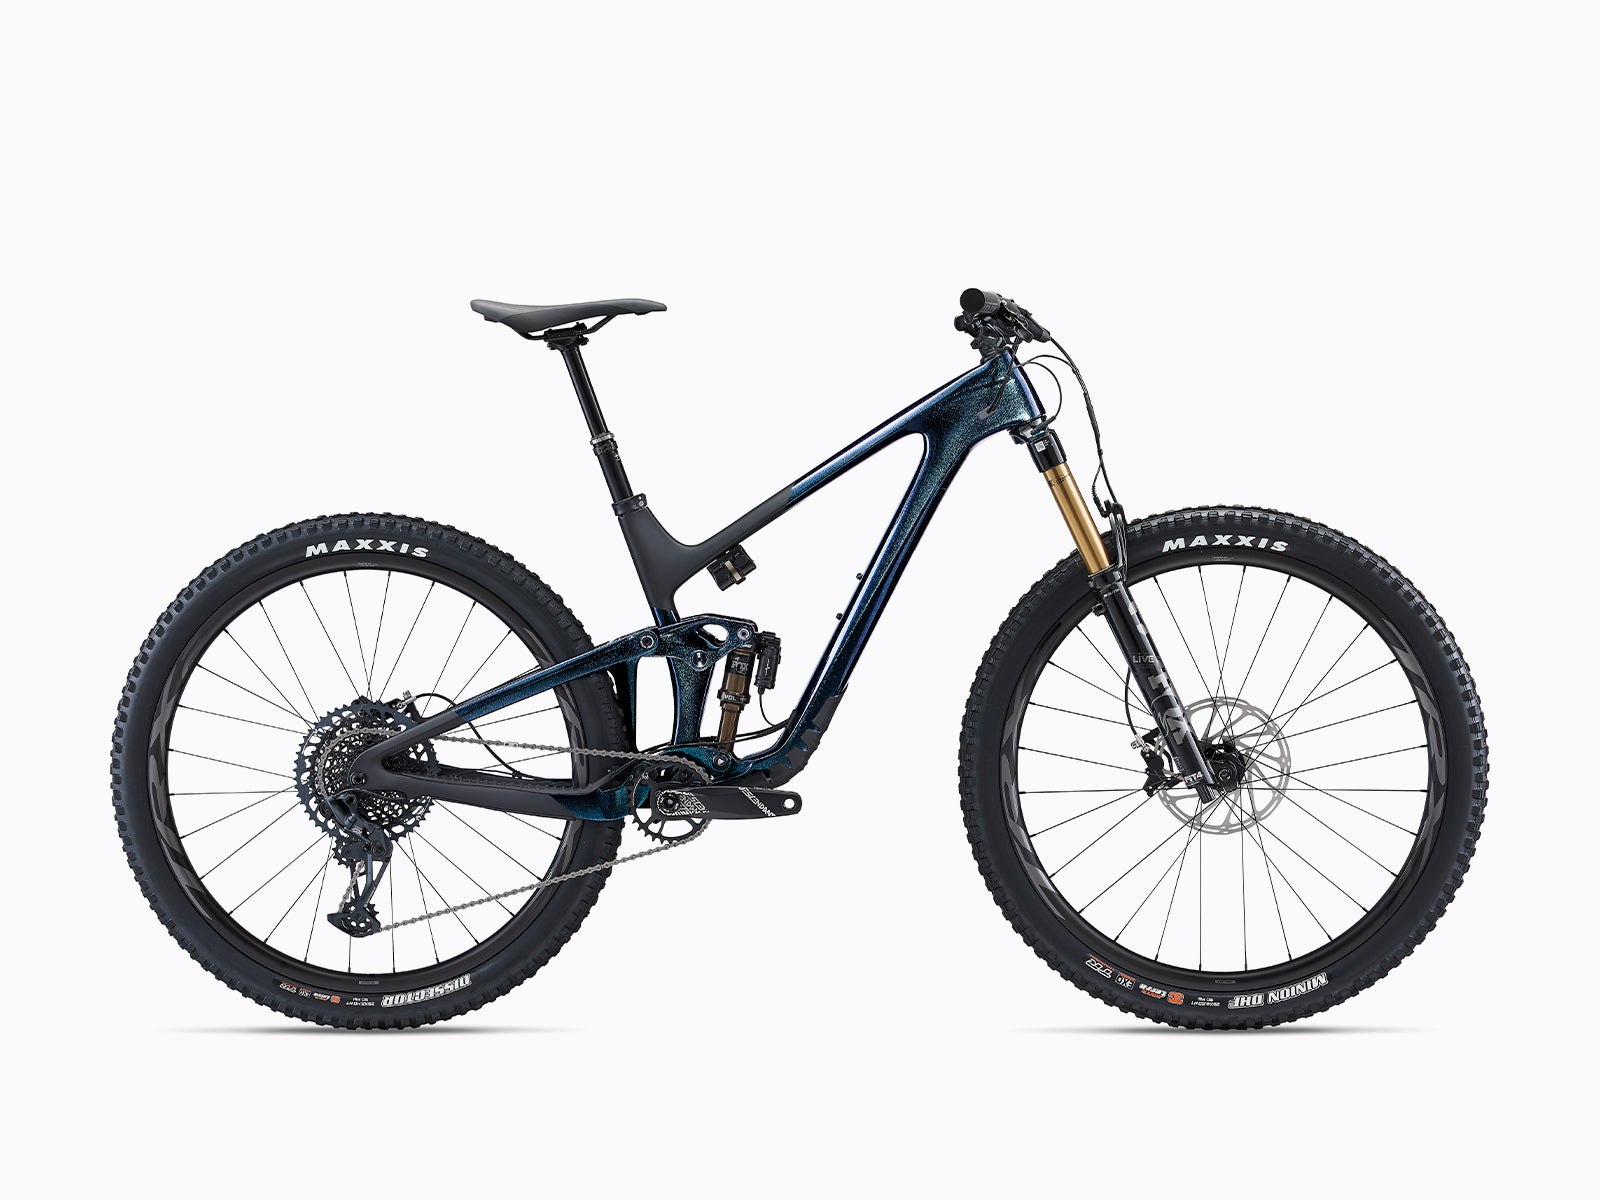 image features the Giant trance X advanced pro 29 1 (2022), a full suspension mountain bike. Now available at Giant Melbourne, an Australian bike shop.